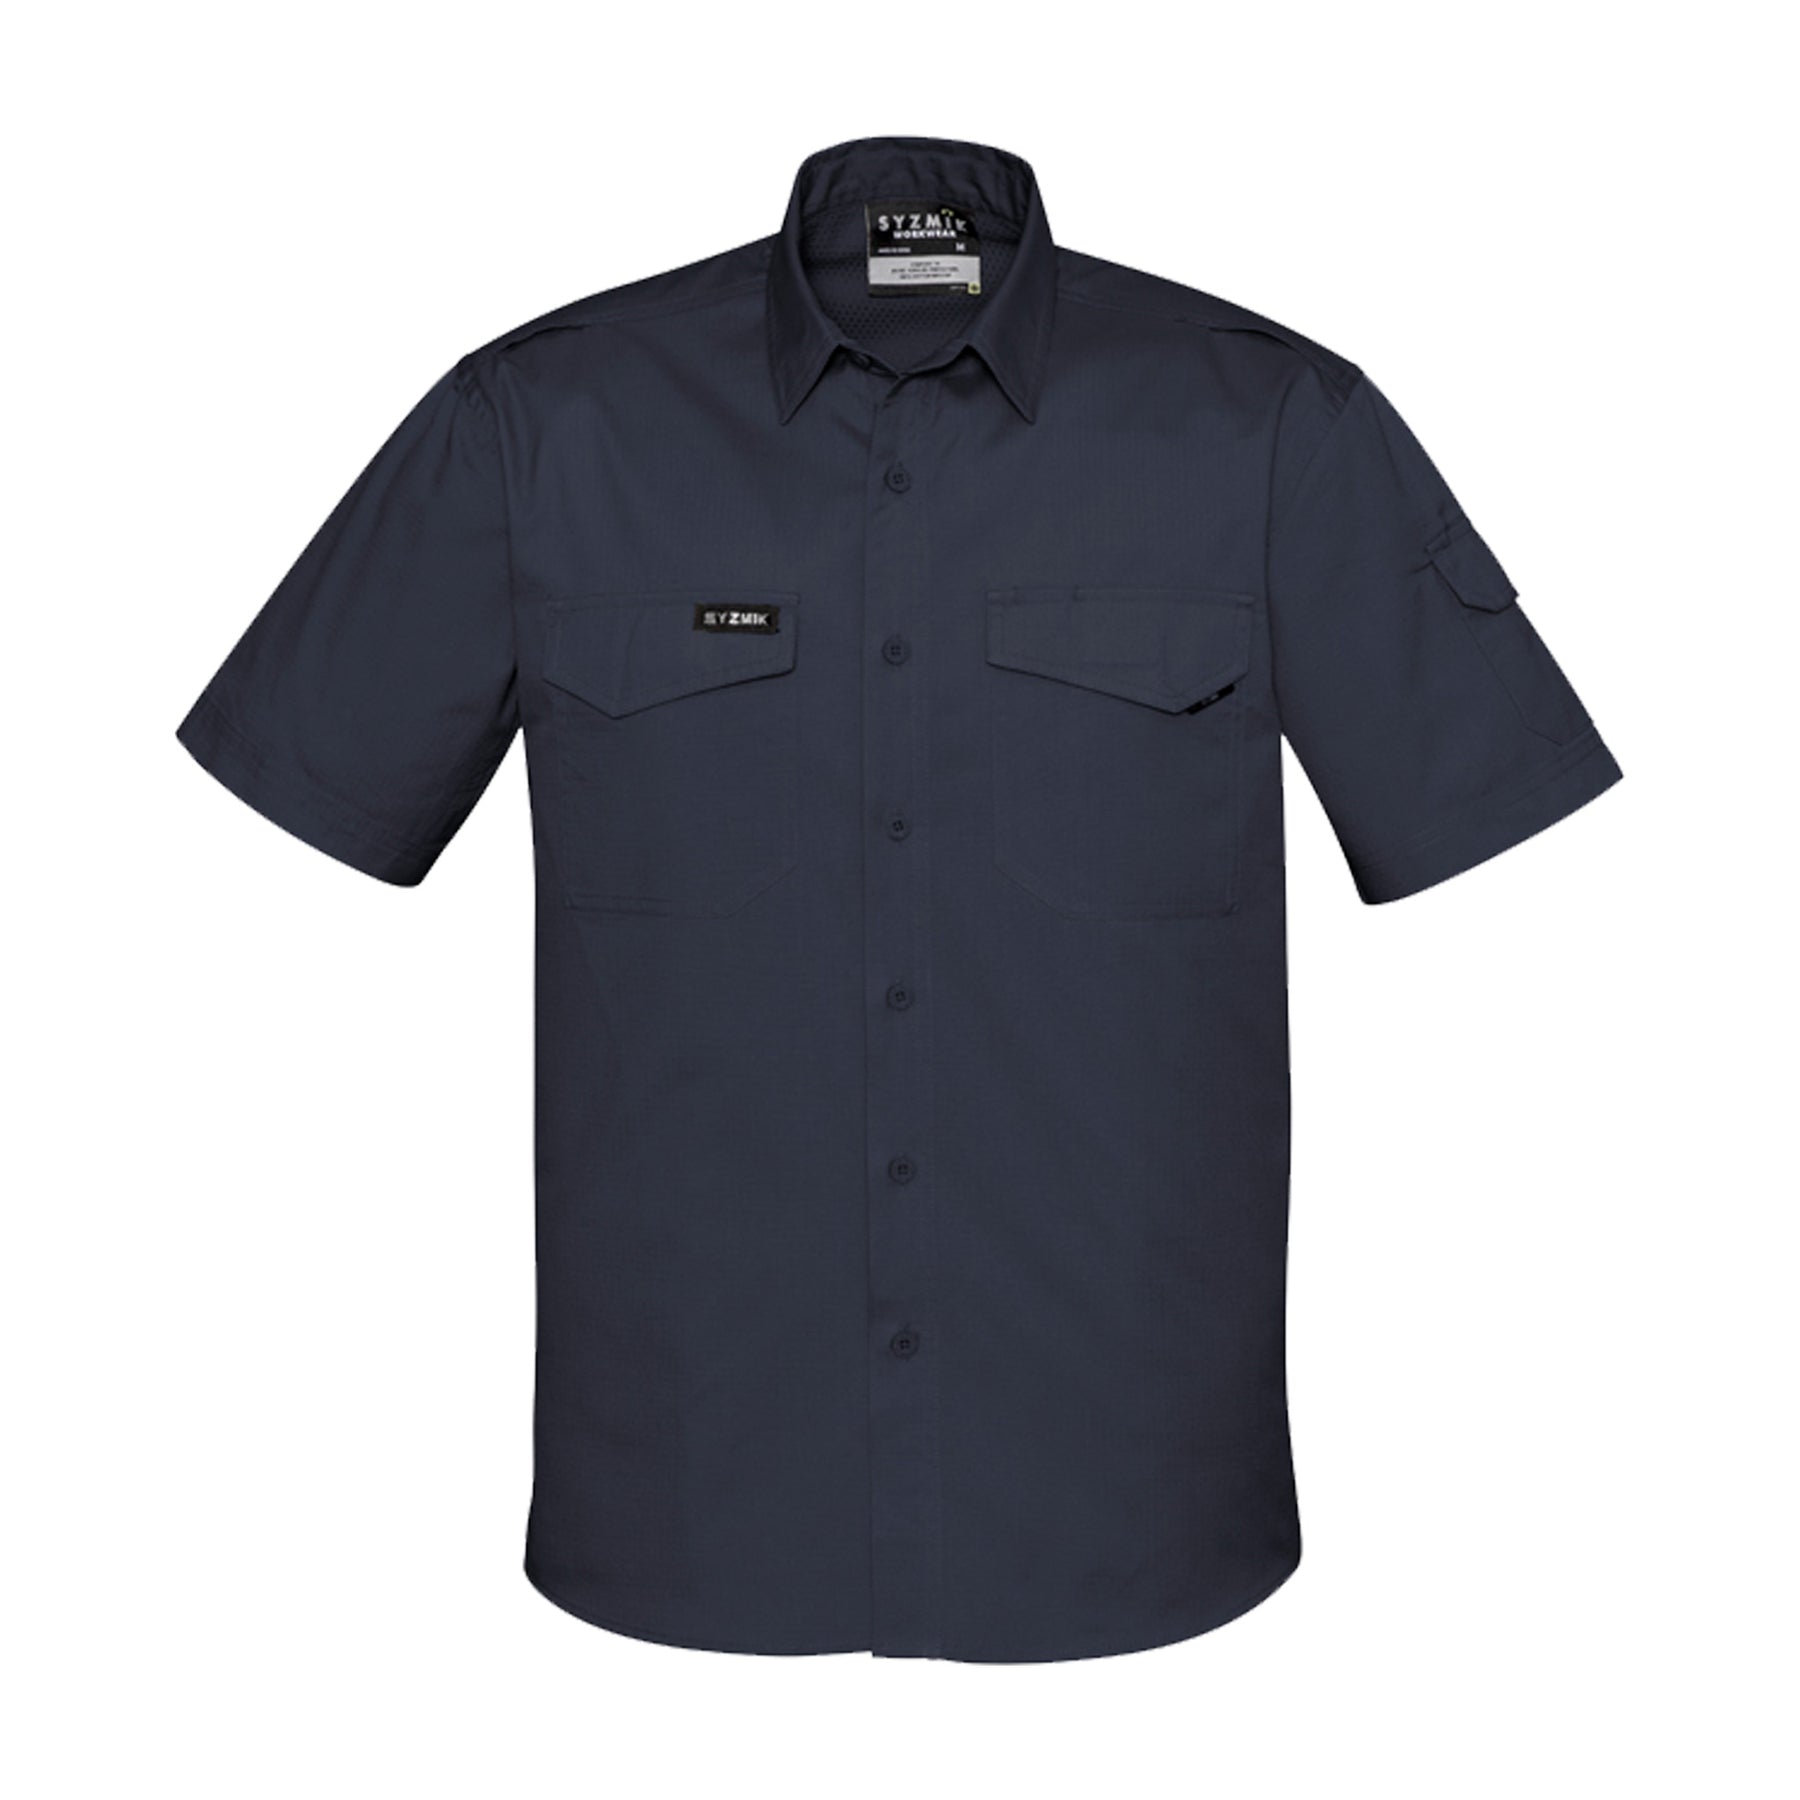 mens rugged cooling short sleeve shirt in charcoal